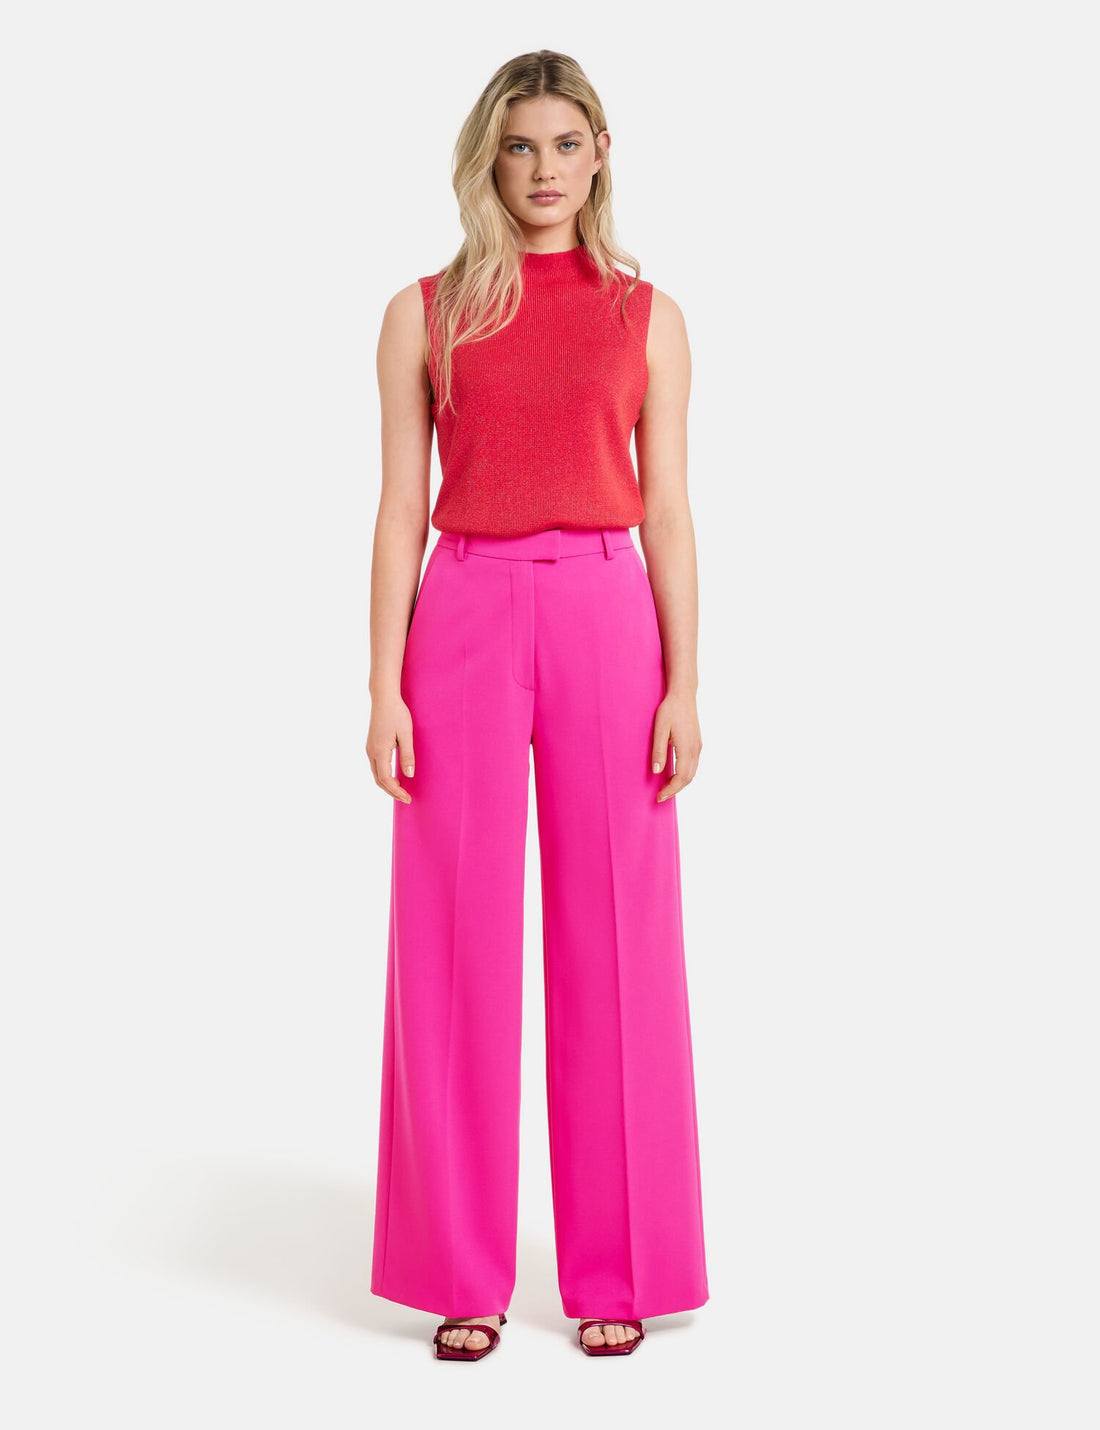 Elegant Trousers With A Wide Leg_520334-11081_3350_01